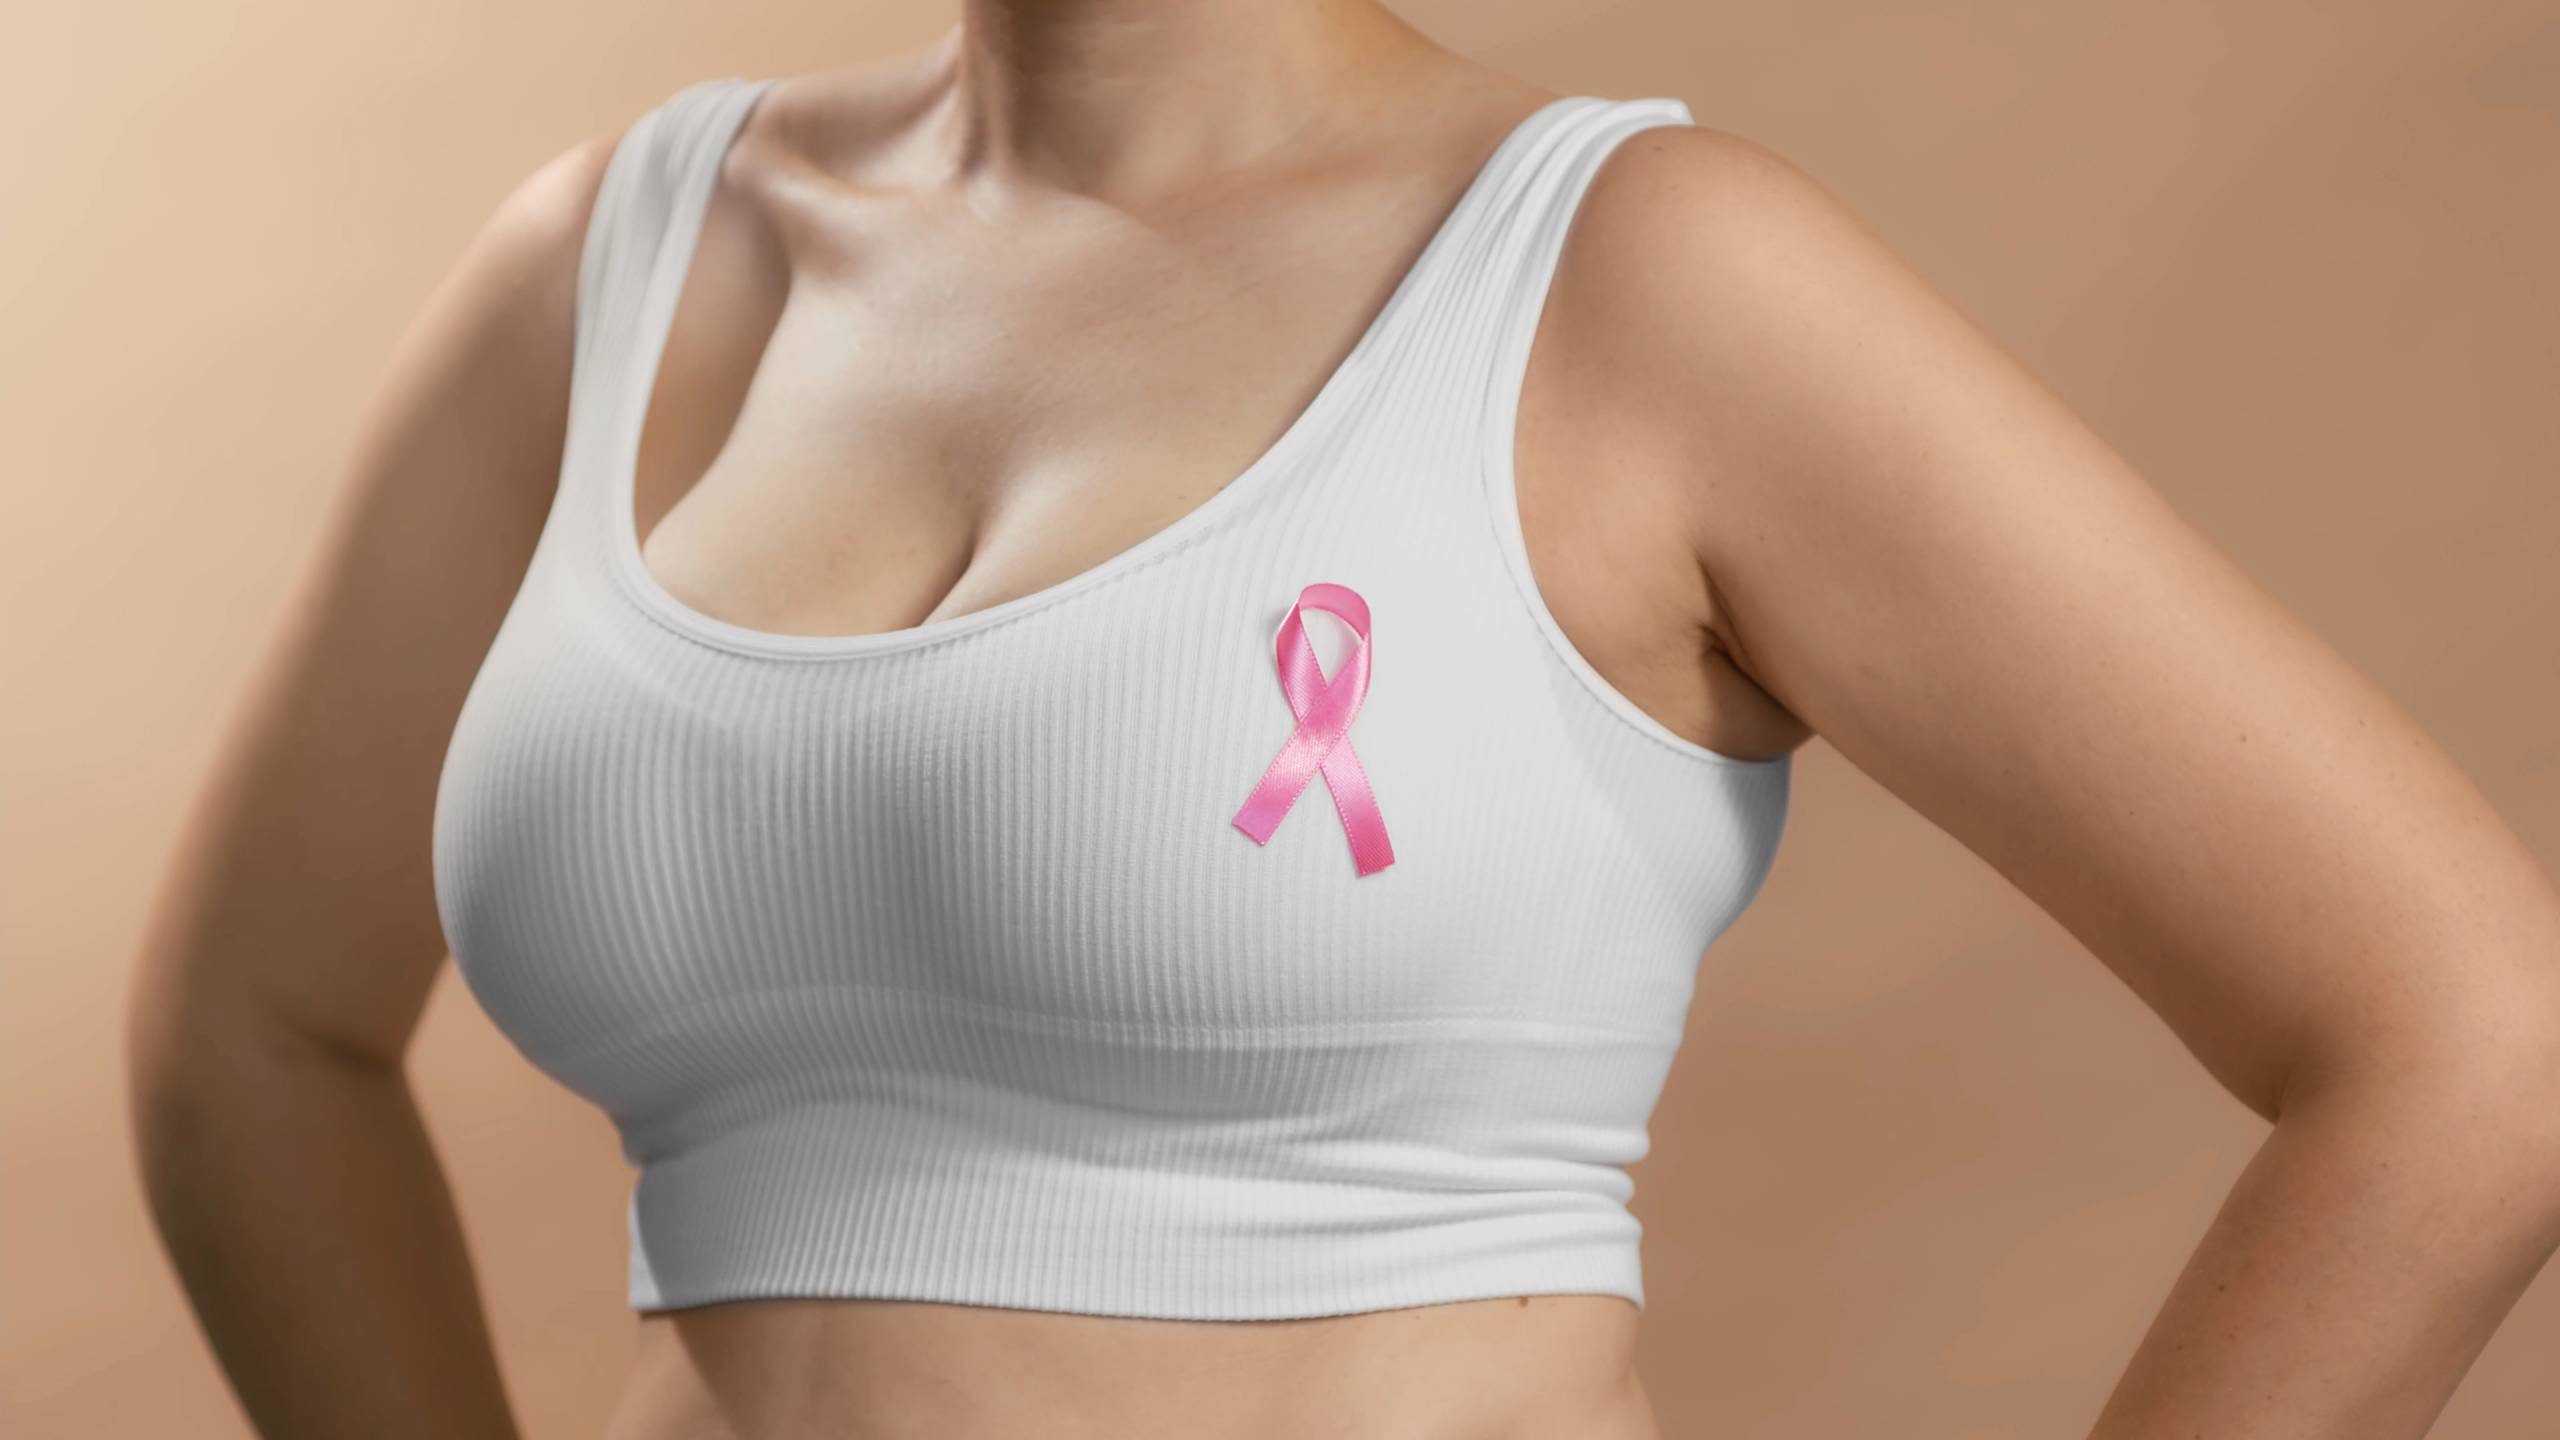 10 Things You Should Know Before Having Breast Aesthetic Surgery